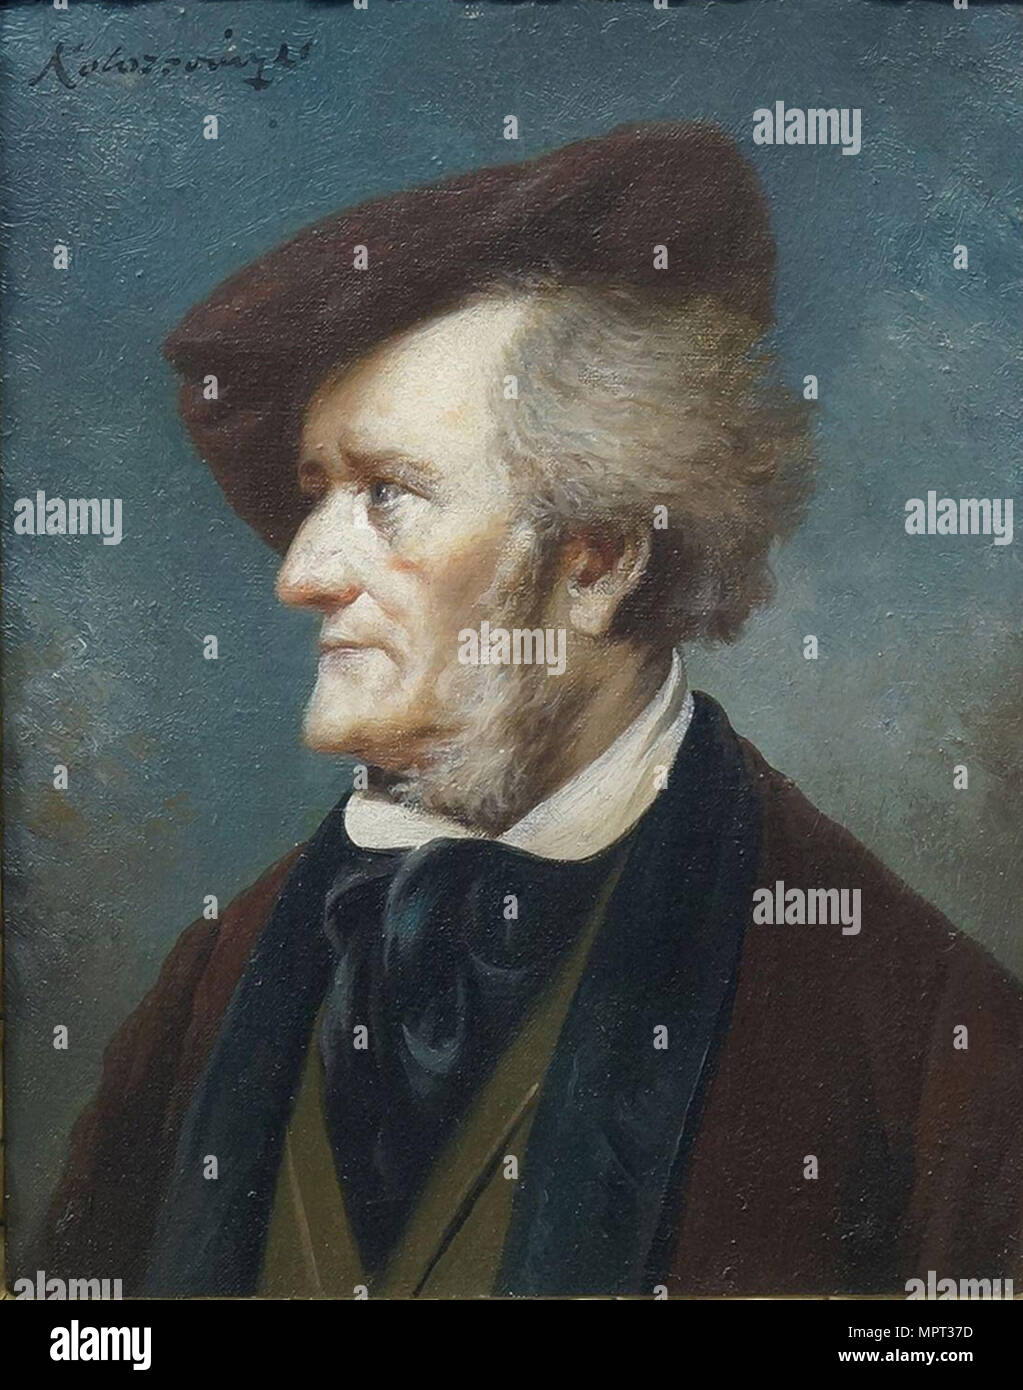 Portrait of the Composer Richard Wagner (1813-1883). Stock Photo